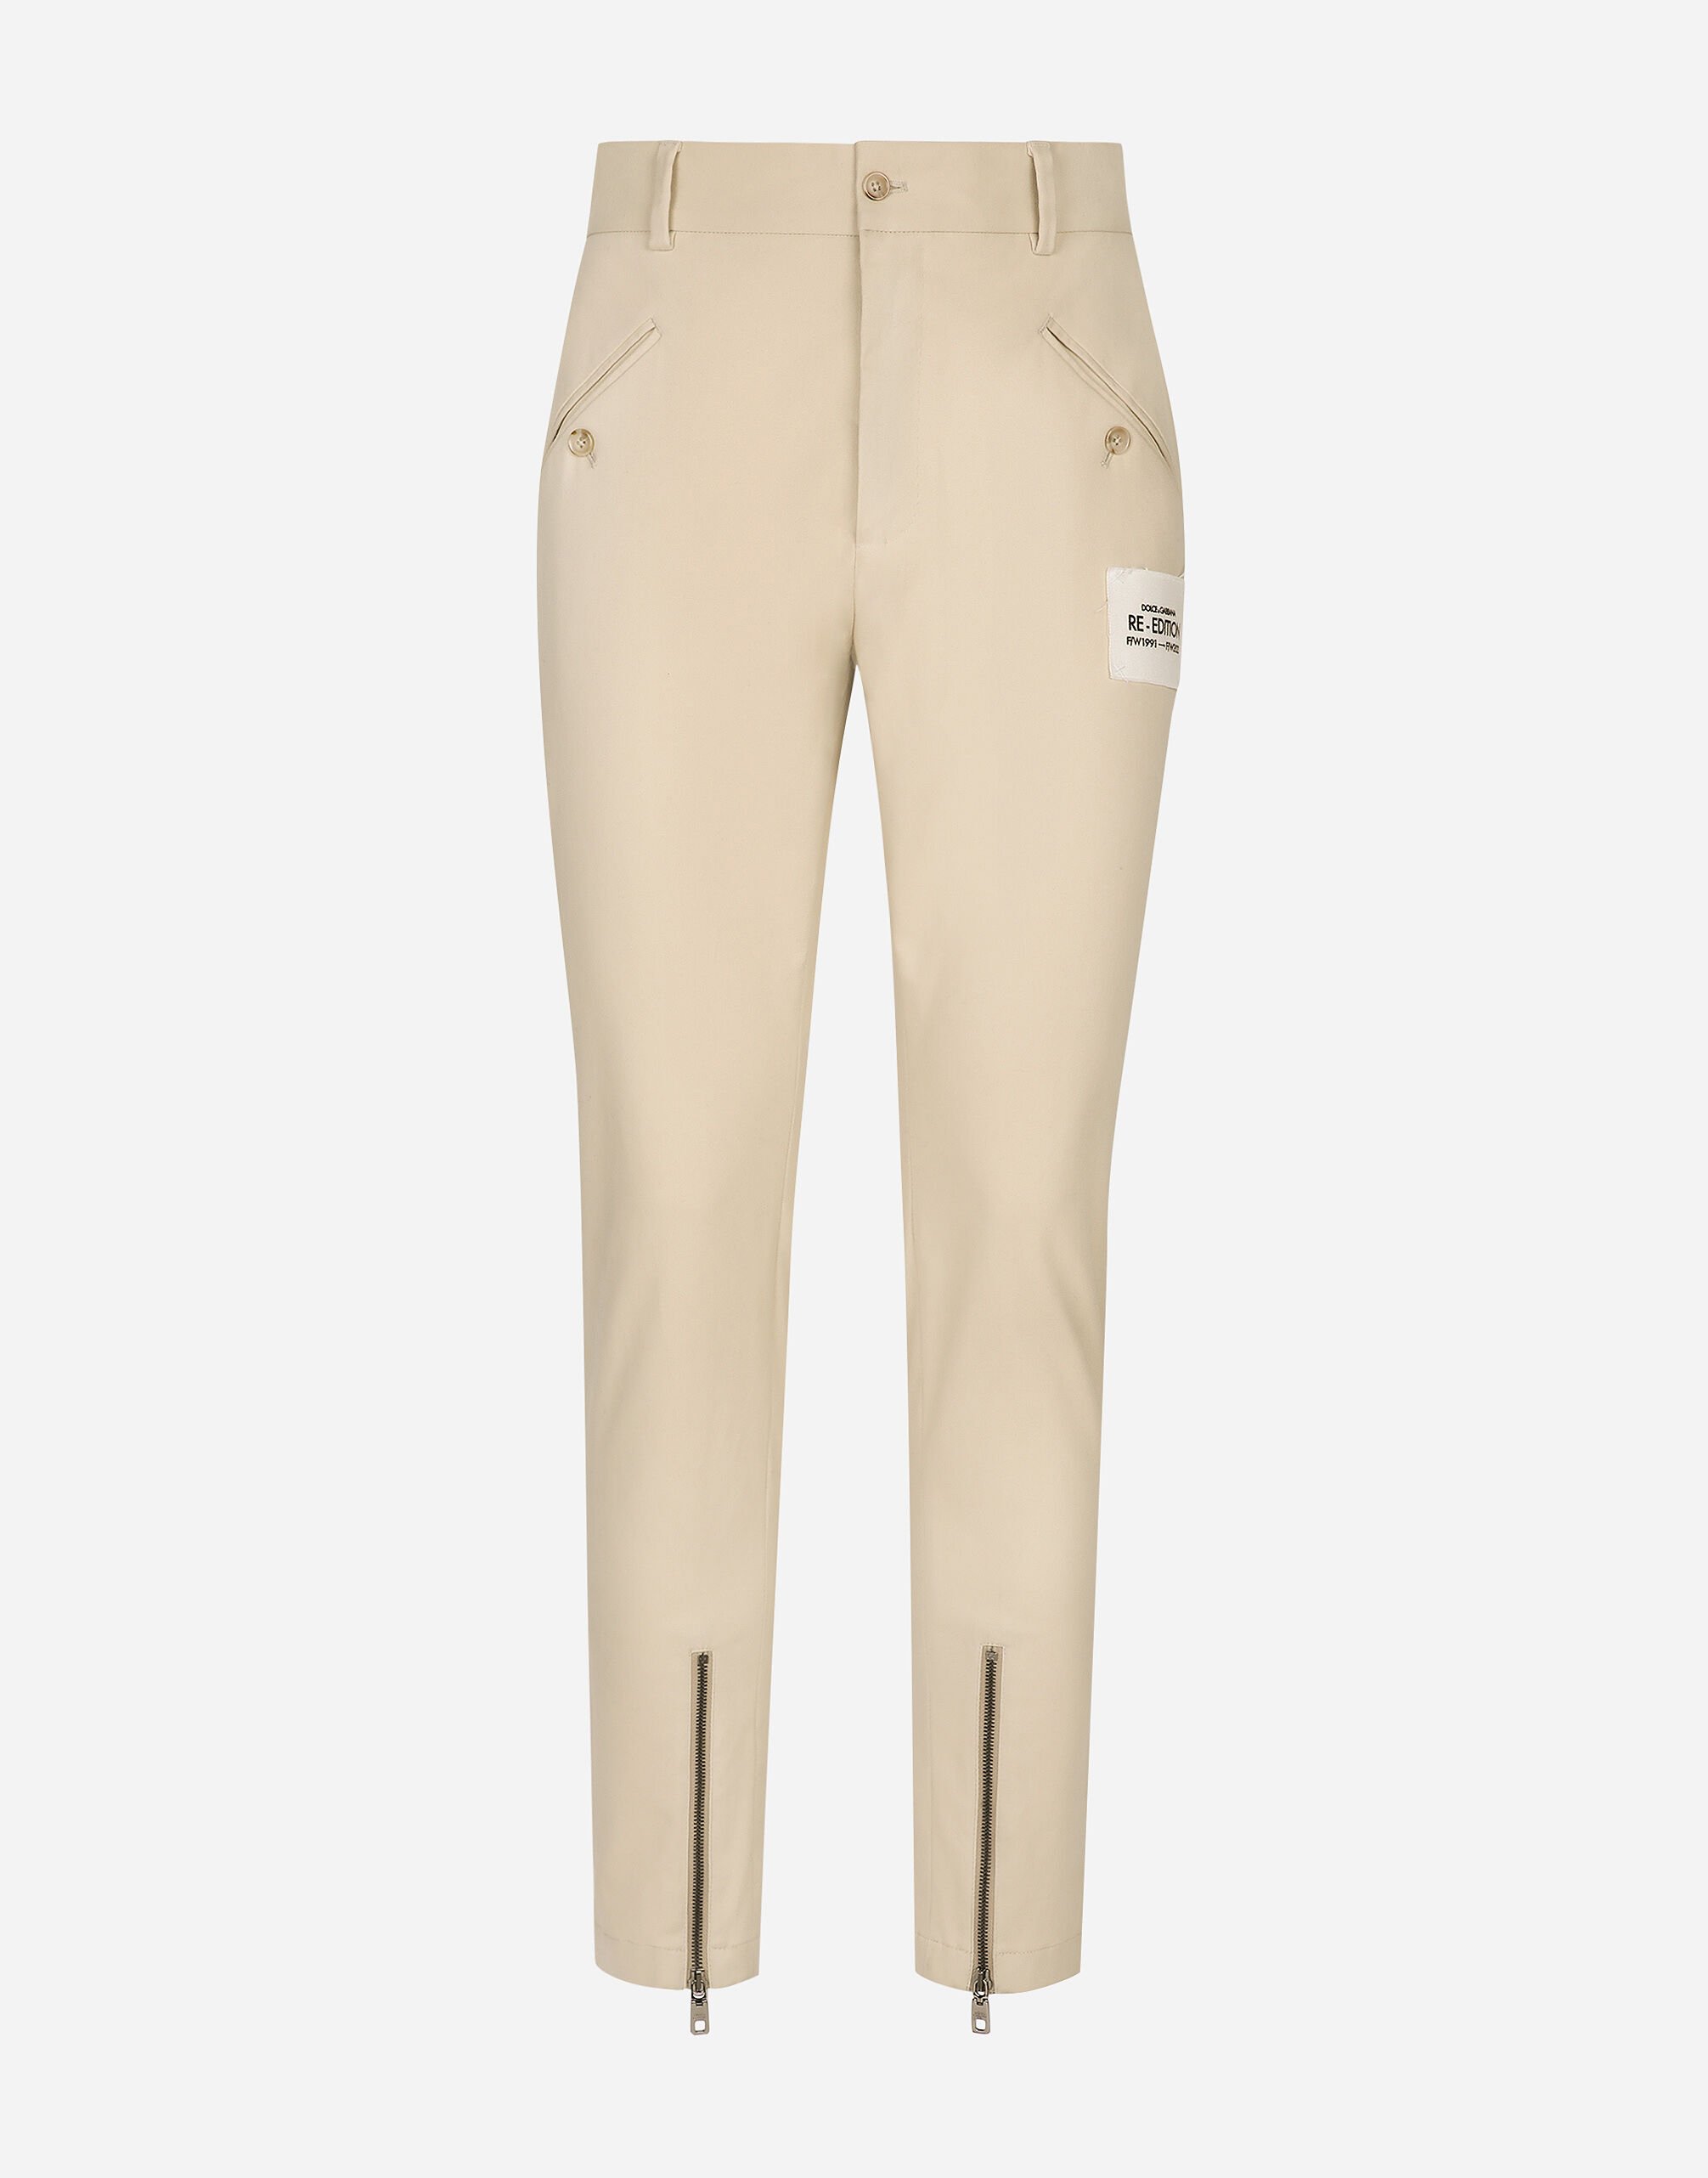 Dolce & Gabbana Stretch cotton pants with Re-Edition label Beige GV4EETFU4JB